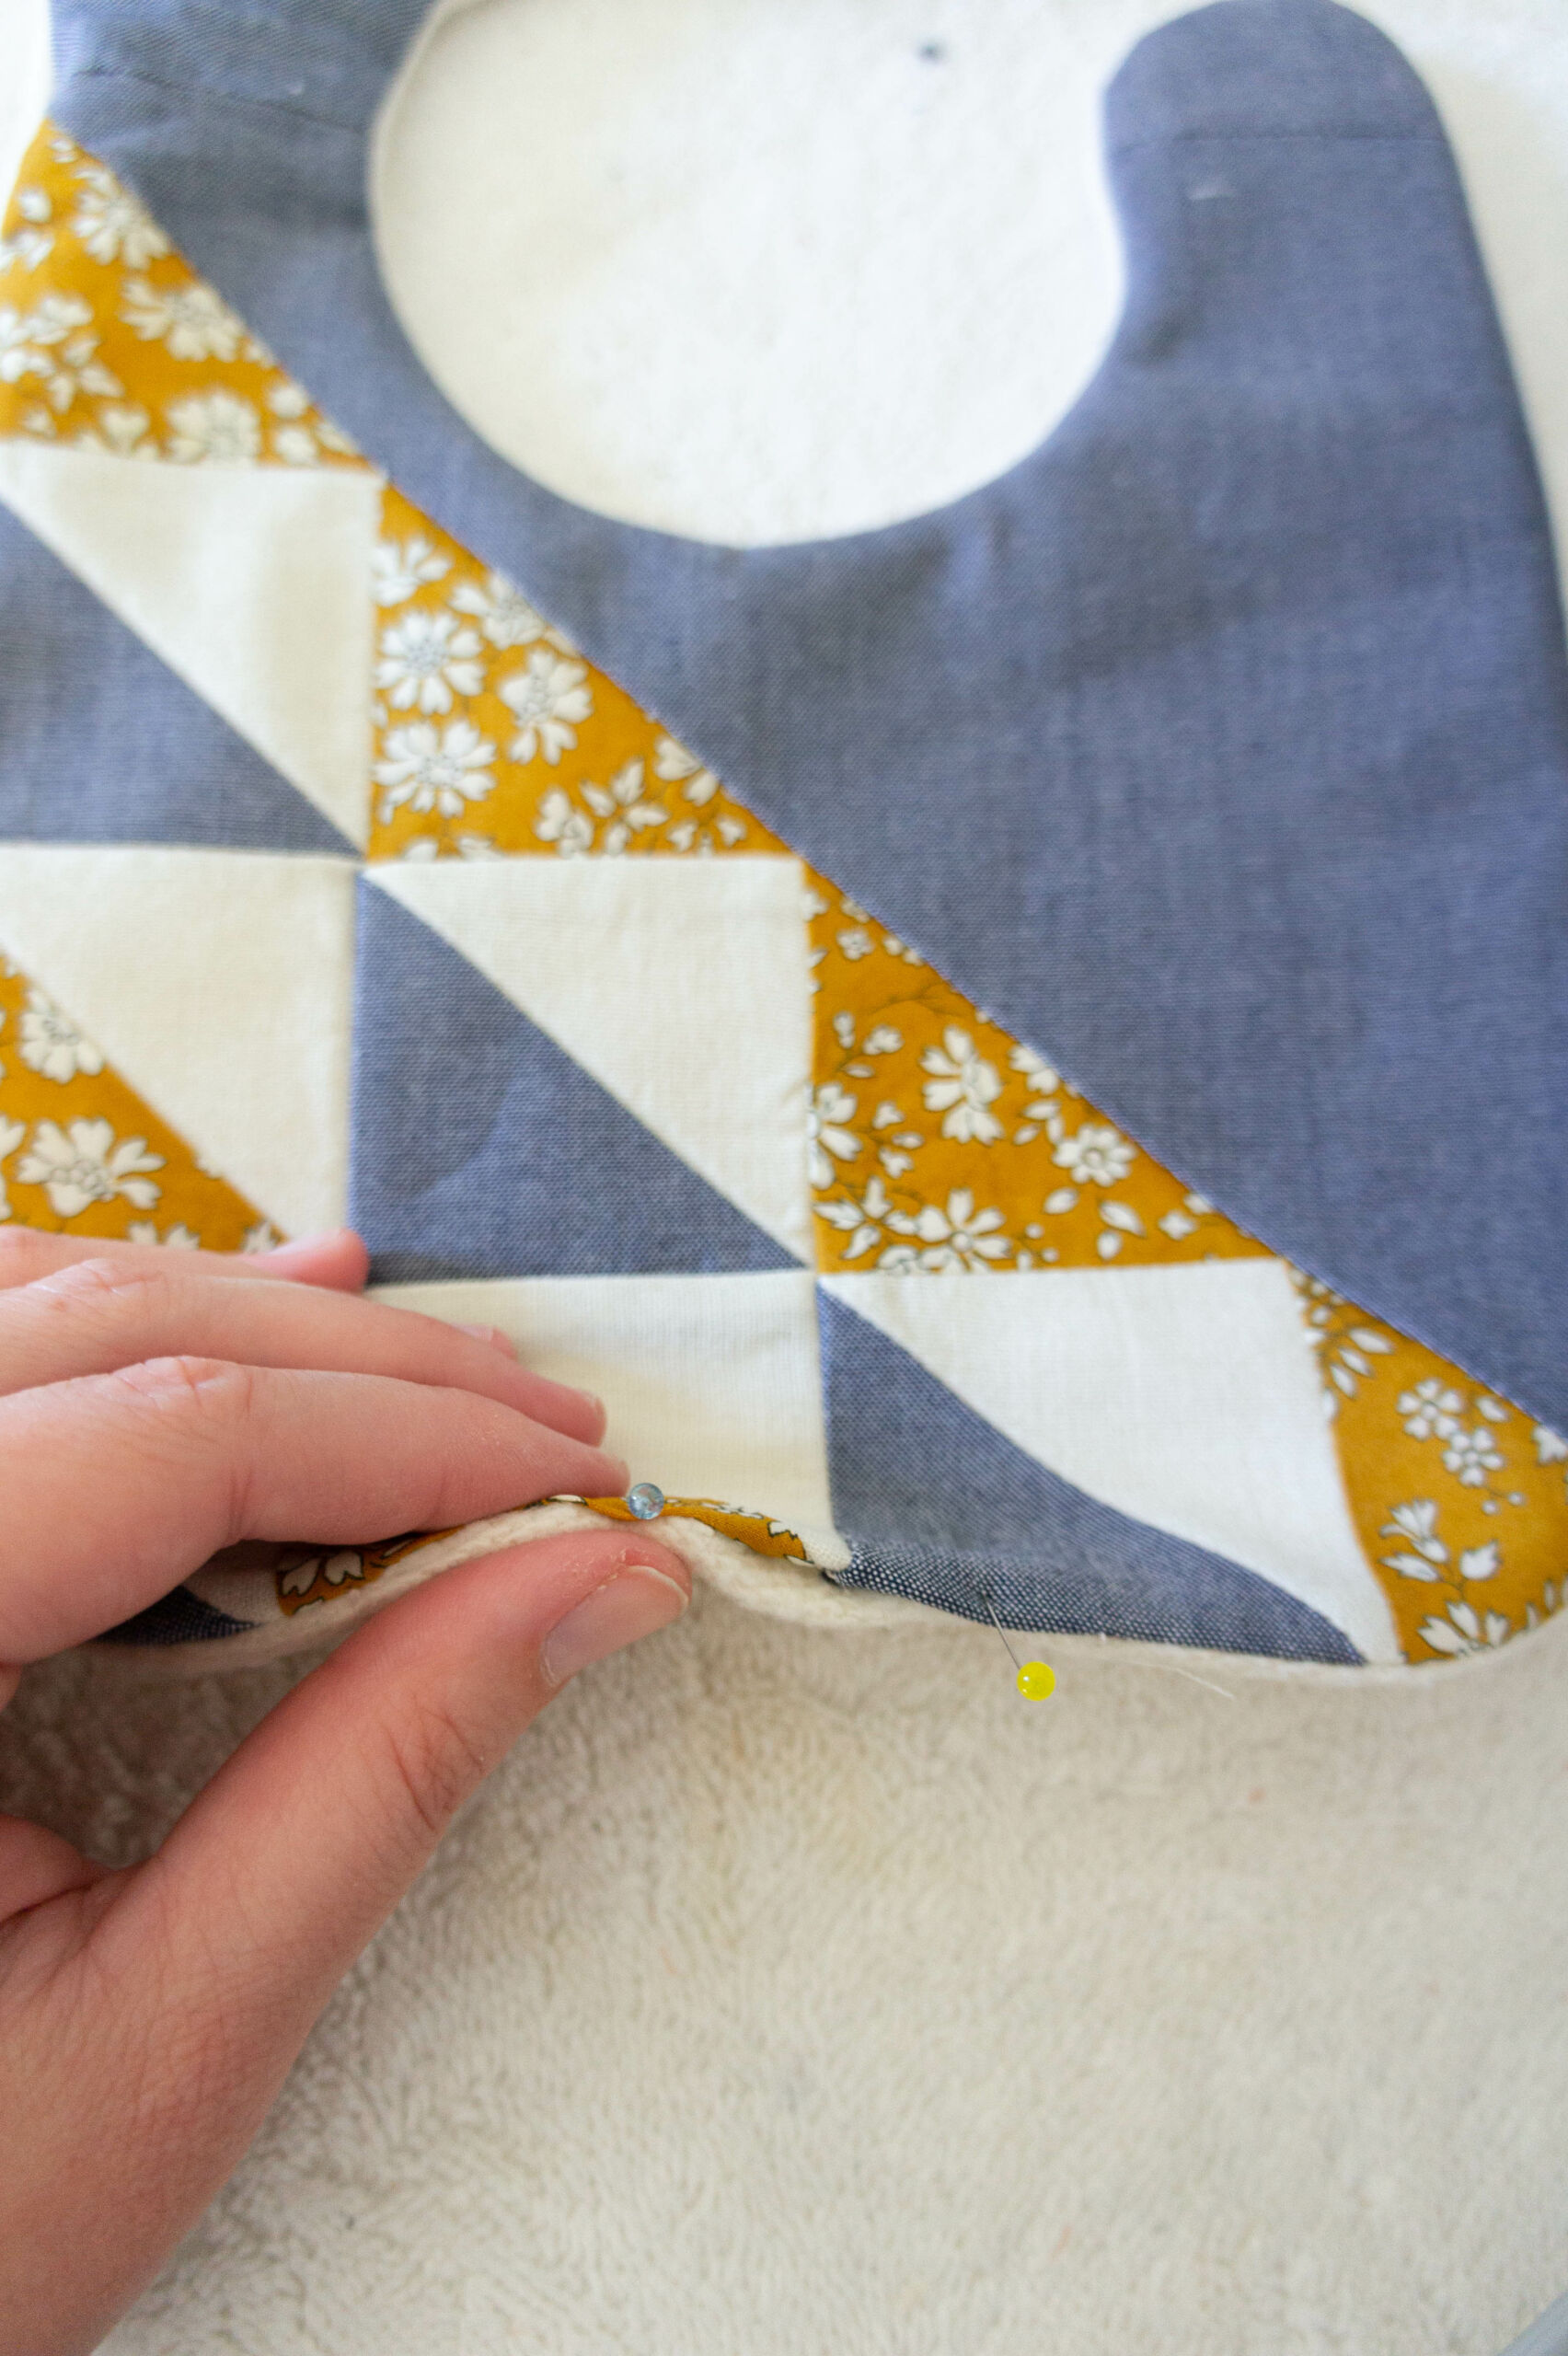 This fast and simple quilted baby bib tutorial uses the Fly Away pattern and fabric scraps to make something beautiful! suzyquilts.com #babybib #sewingtutorial